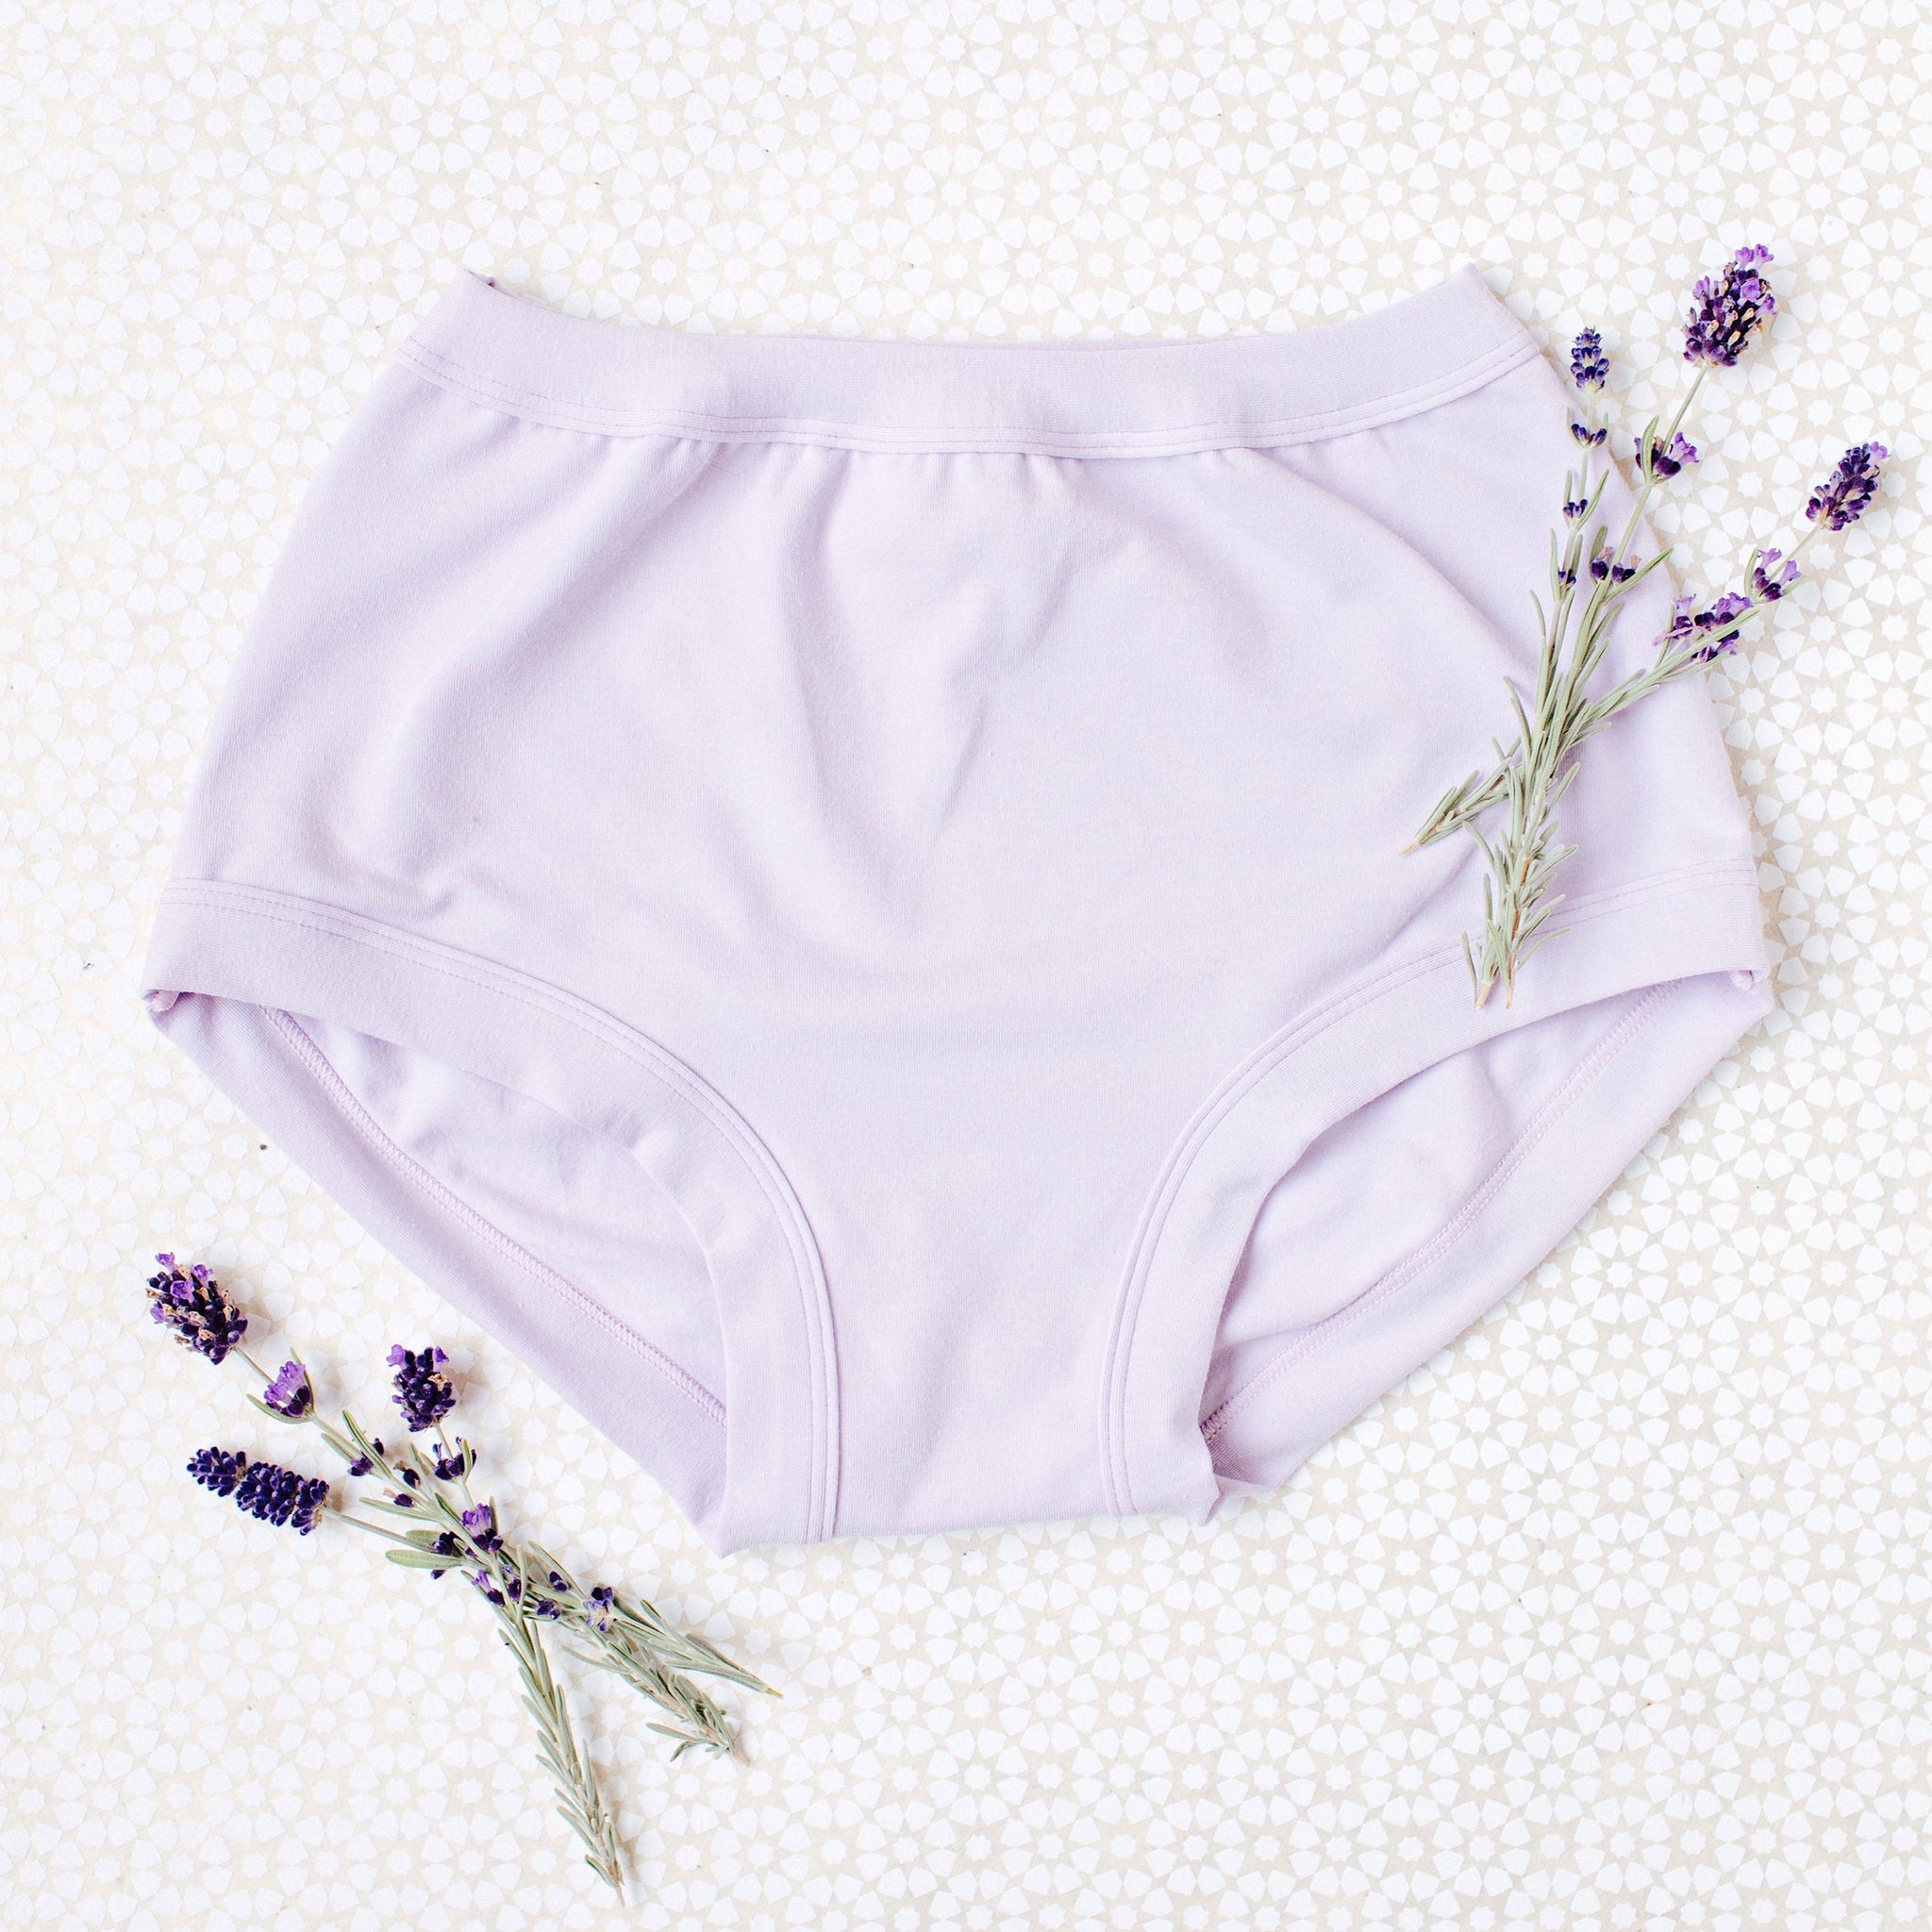 Thunderpants - Organic Cotton Underwear Made in the USA. Wedgie-Proof ...